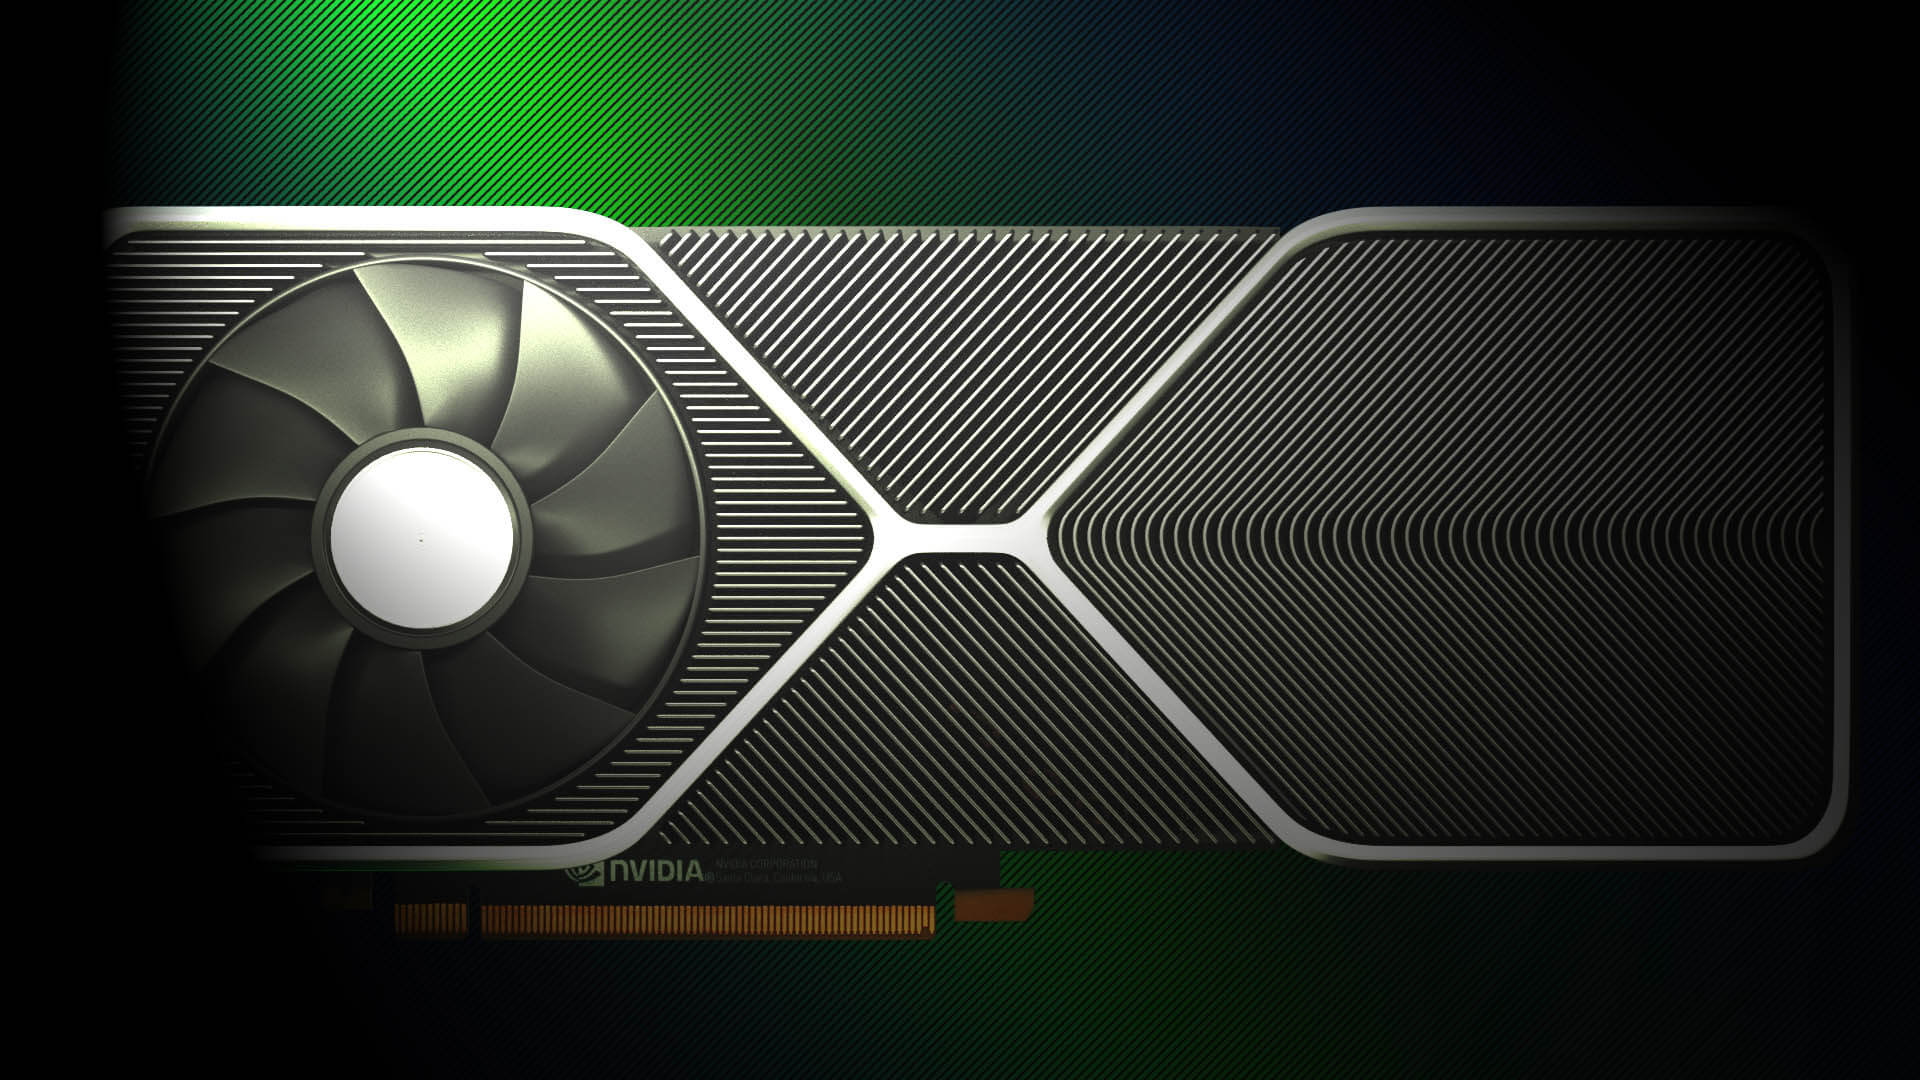 Micron slips up, reveals details of Nvidia's upcoming RTX 3090